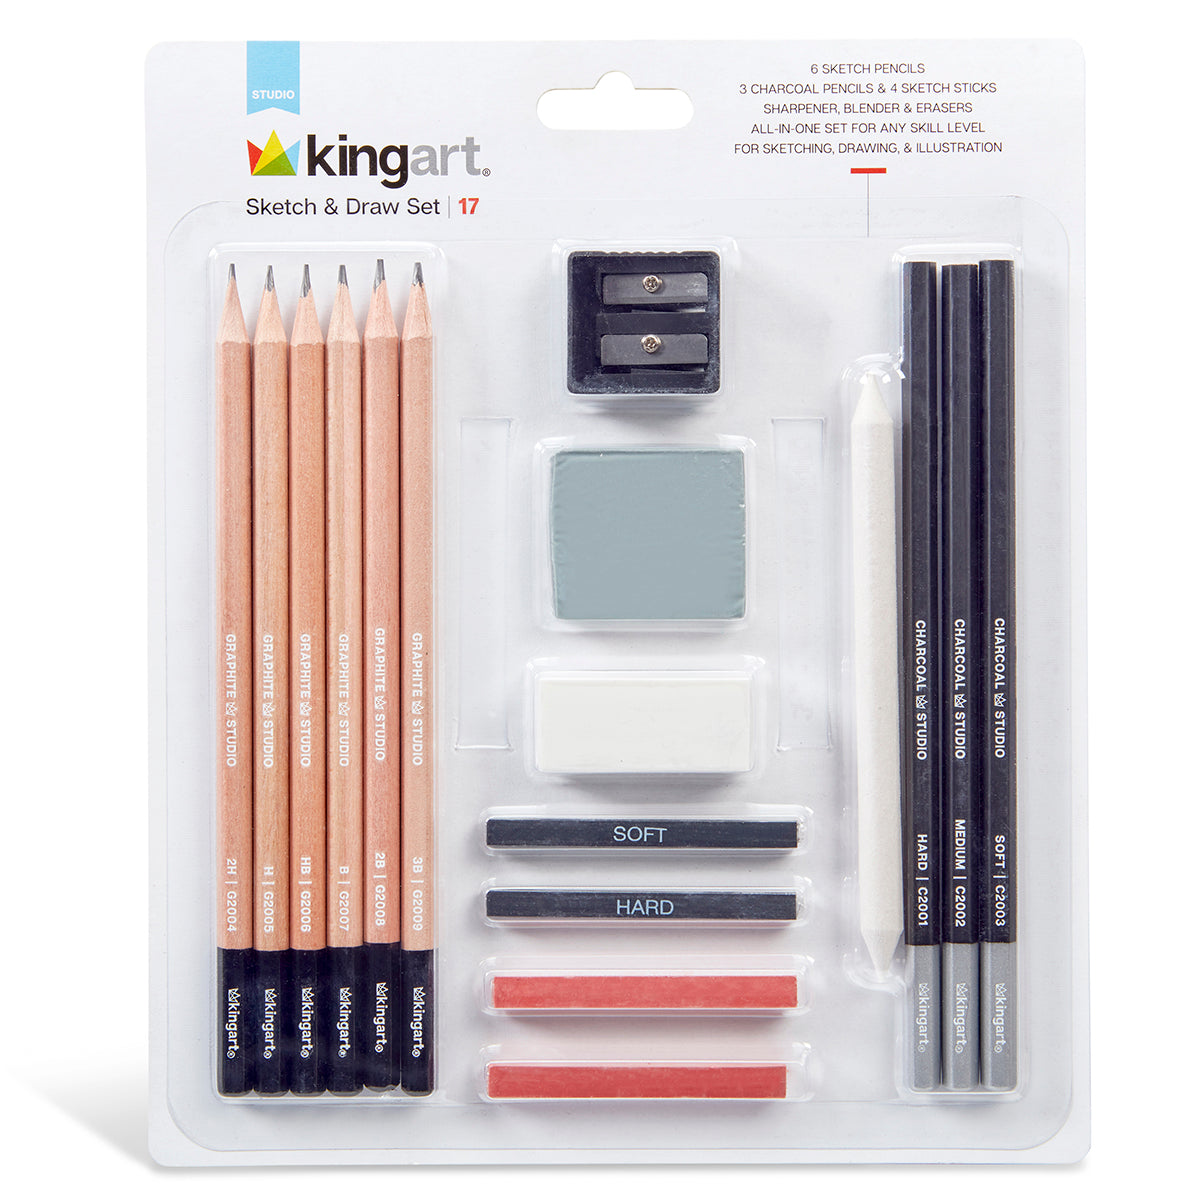 55ct Artist Pencil Drawing & Sketching Set by Artsmith